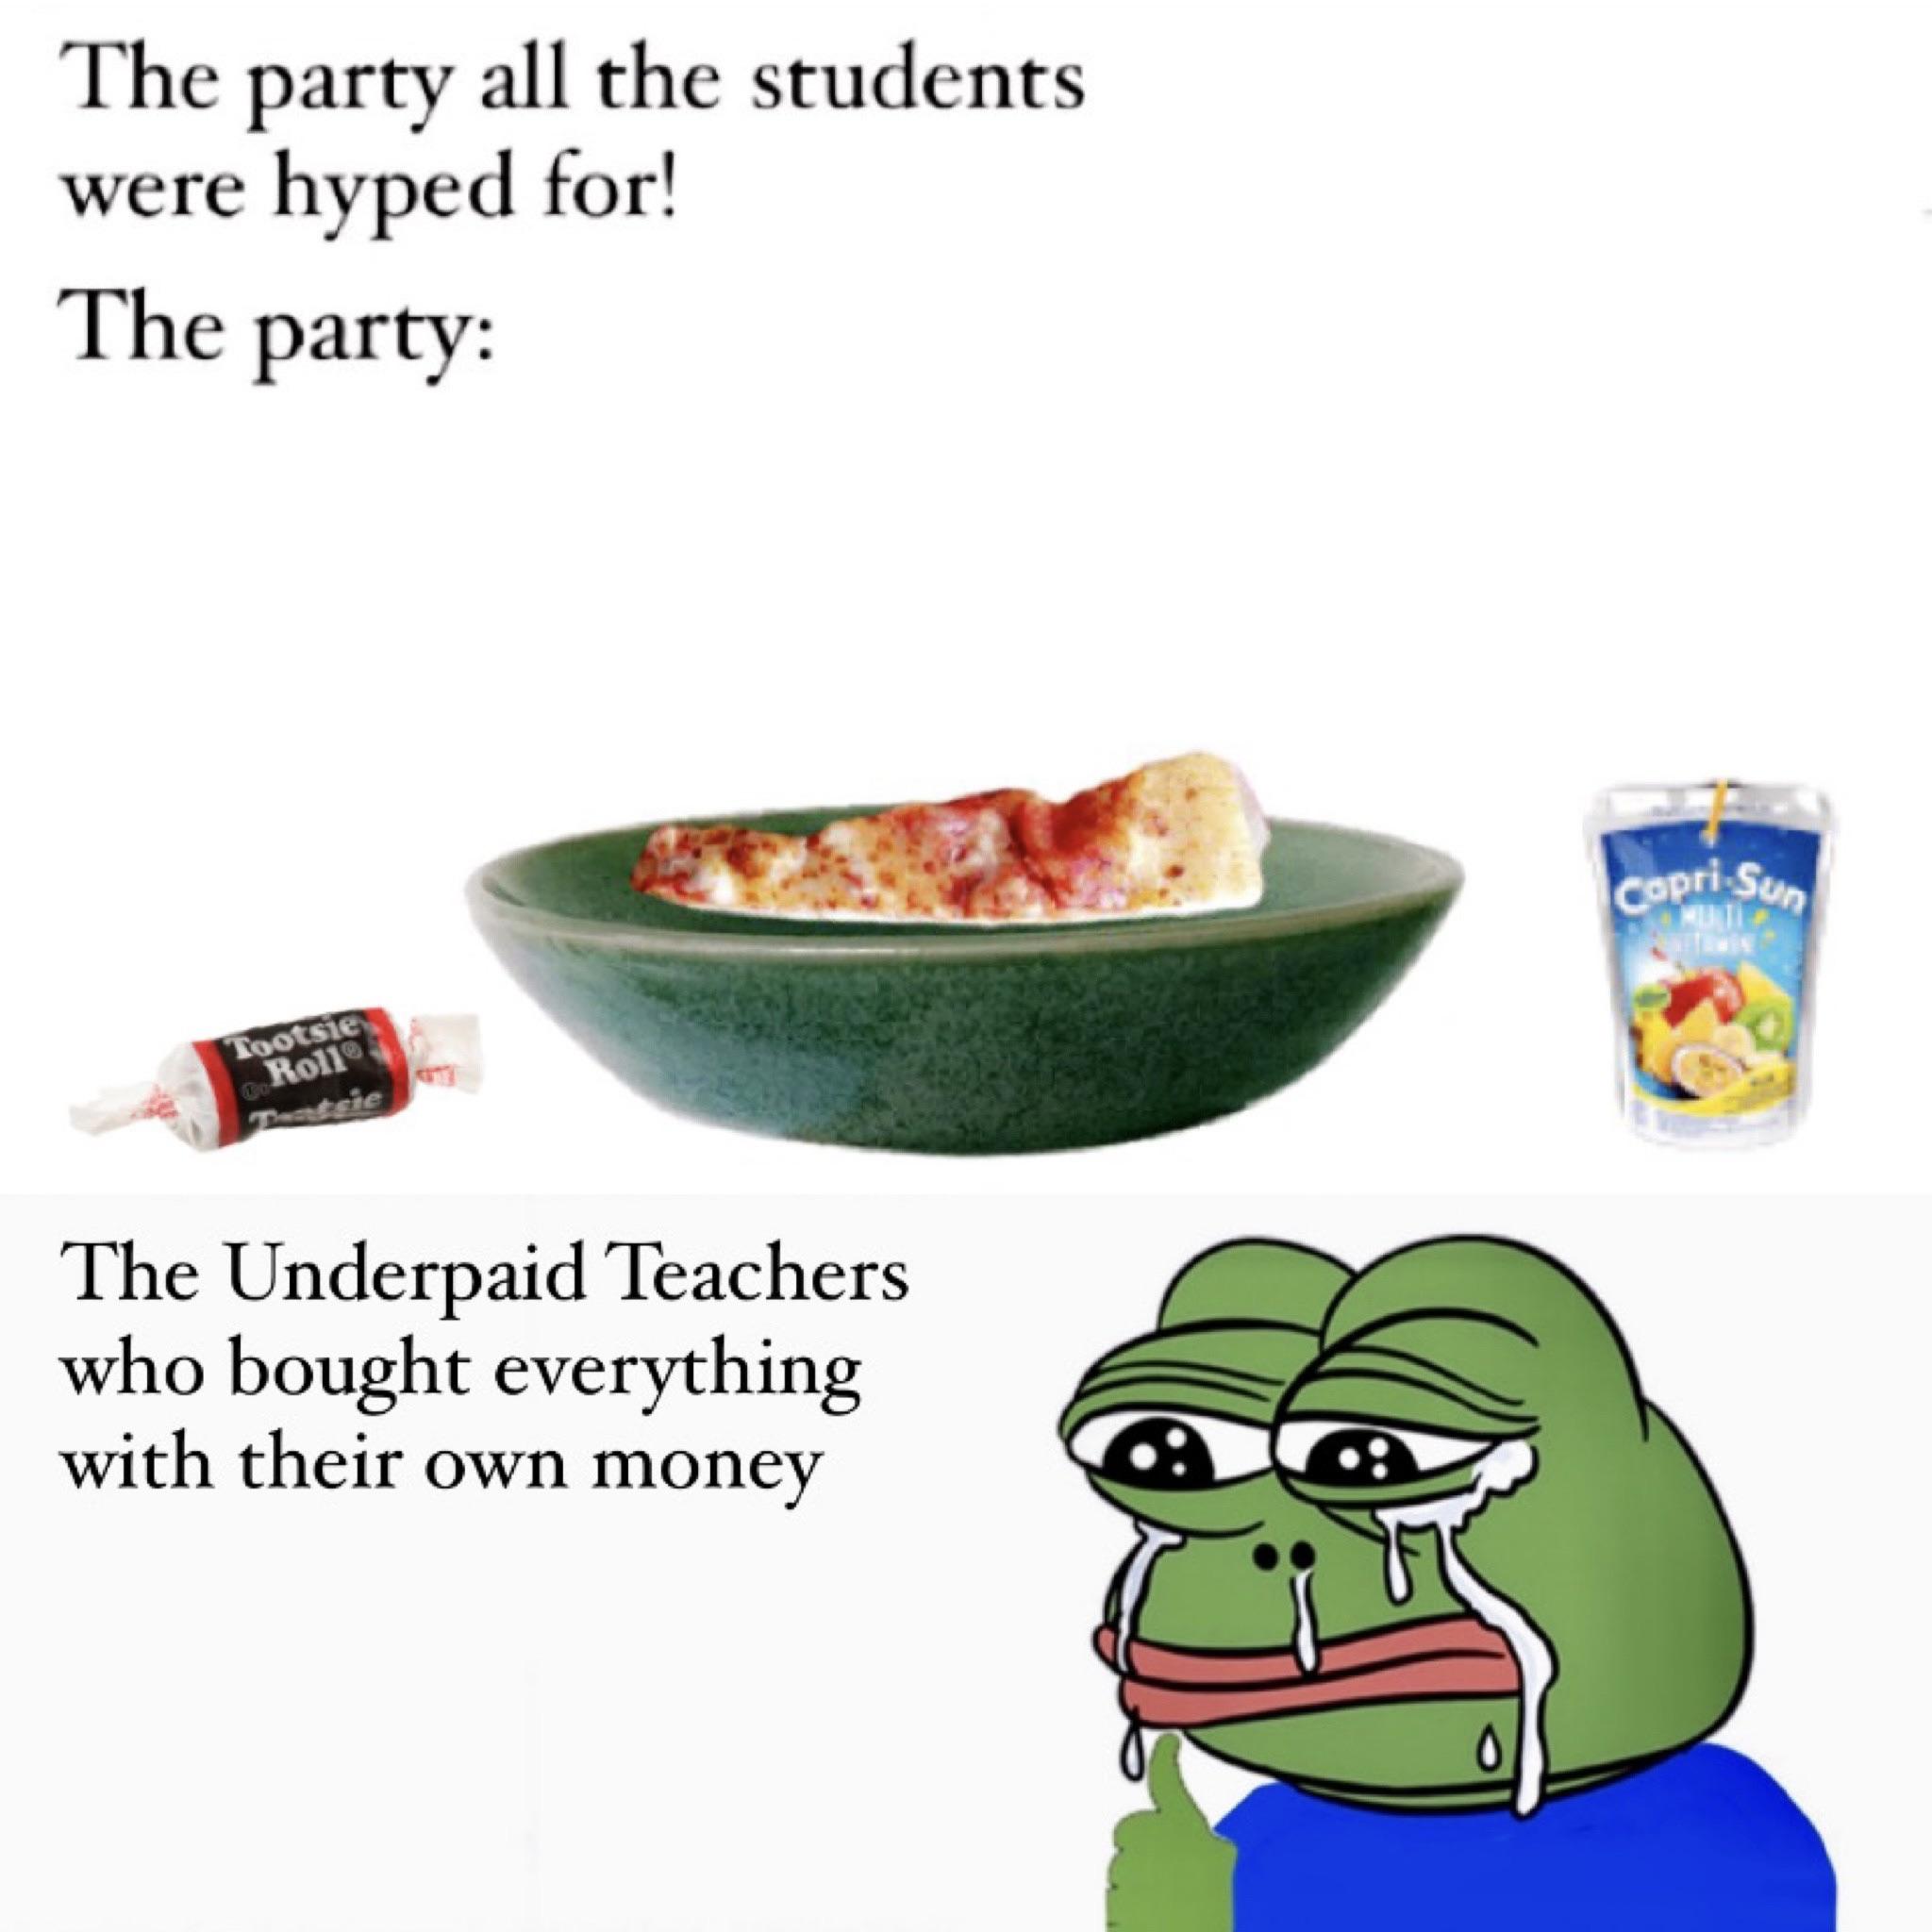 diet food - The party all the students were hyped for! The party copri Sun Tootste Roll gie The Underpaid Teachers who bought everything with their own money 0